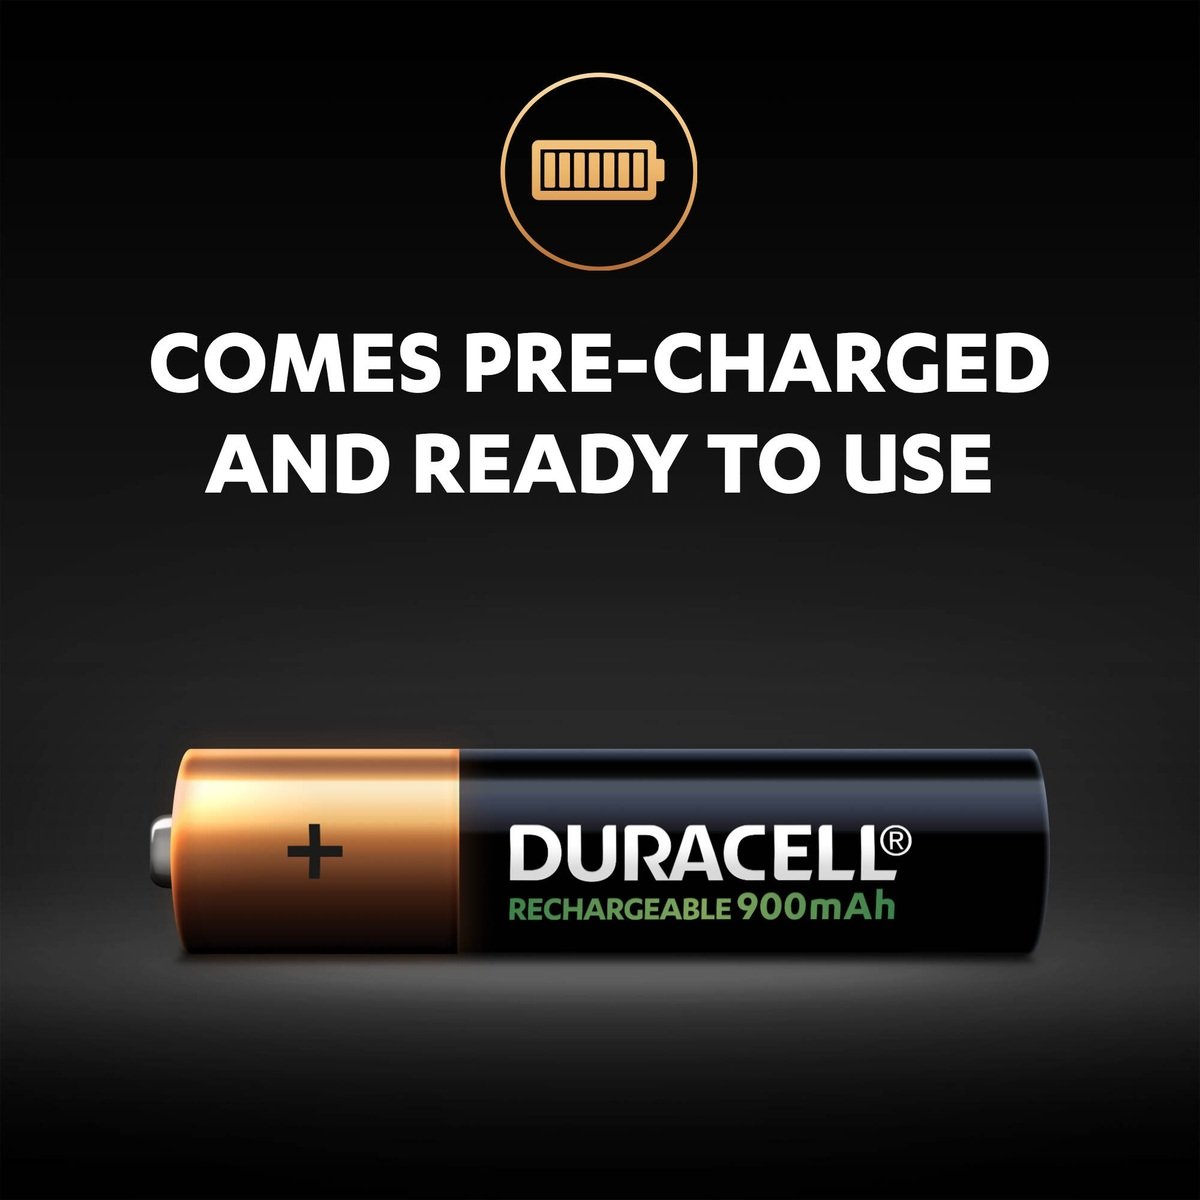 Duracell Rechargeable AAA 900mAh Batteries, pack of 4